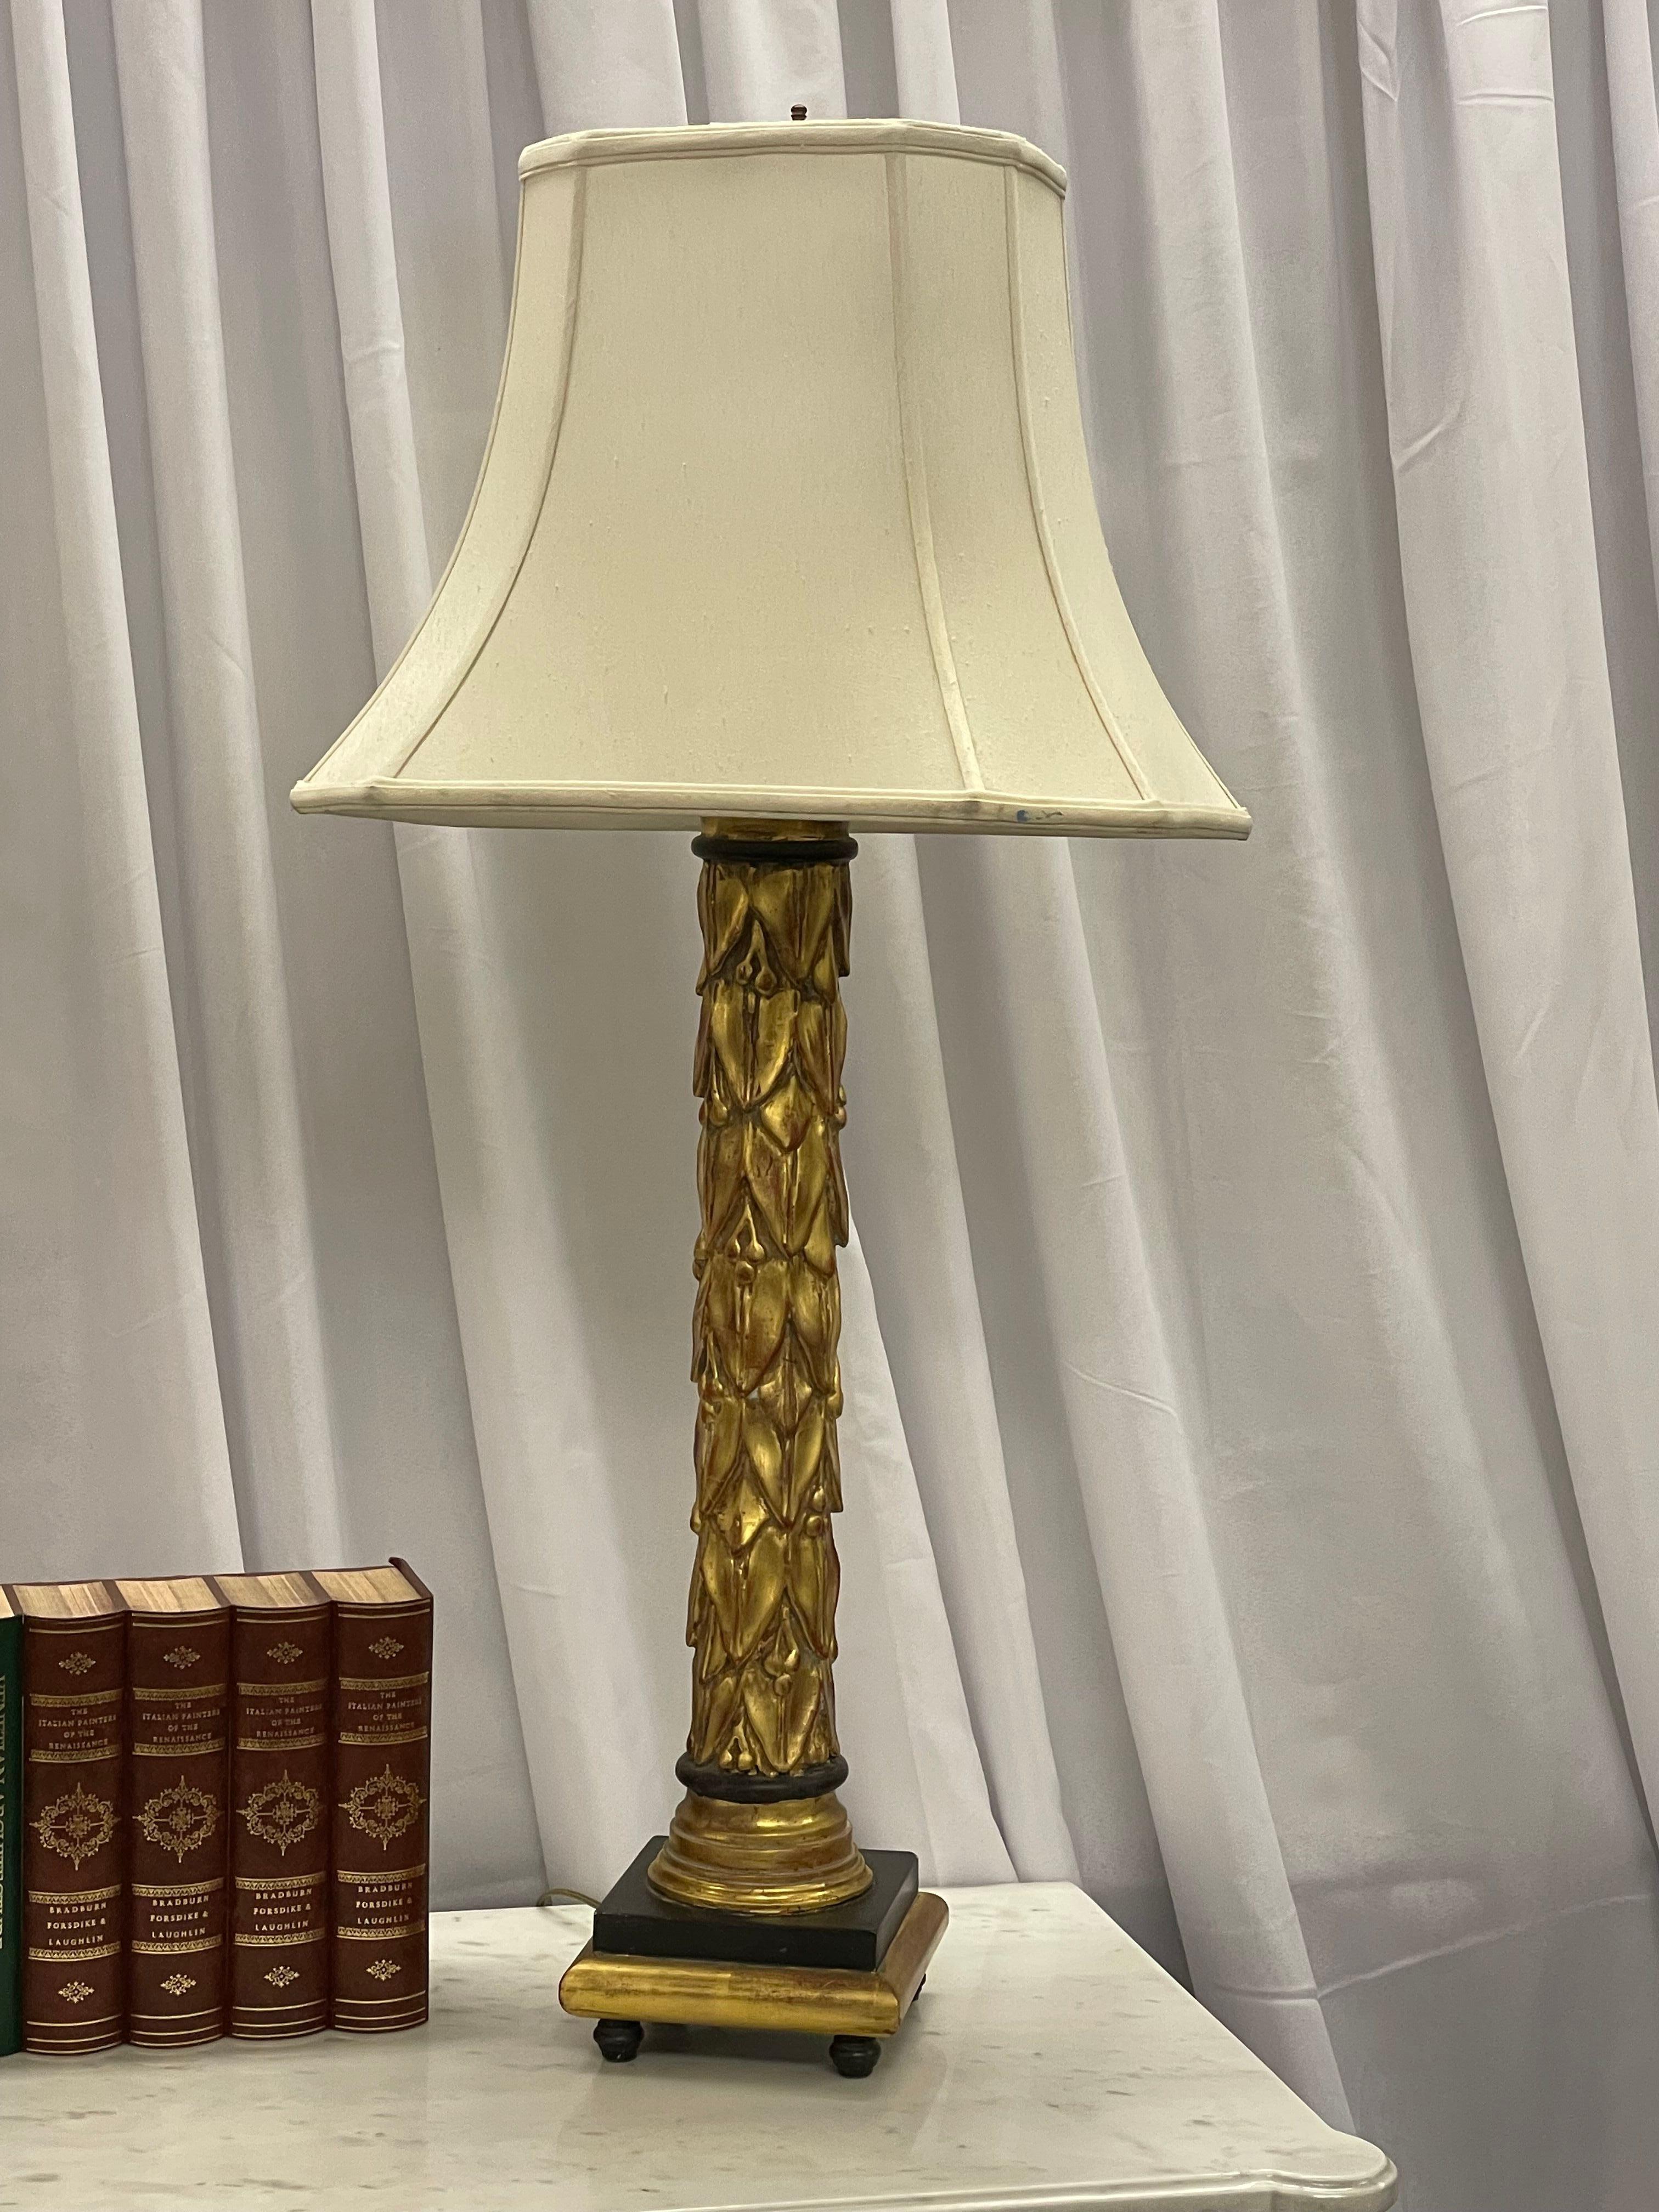 Pair of Maison Jansen table lamps having fleur de lis gilt gold and ebony design in the Hollywood Regency or Mid Century Modern Fashion. A truly stunning pair of lamps with small carved grapes inside the leafs.

Giltwood, Ebony
France, 1950s.